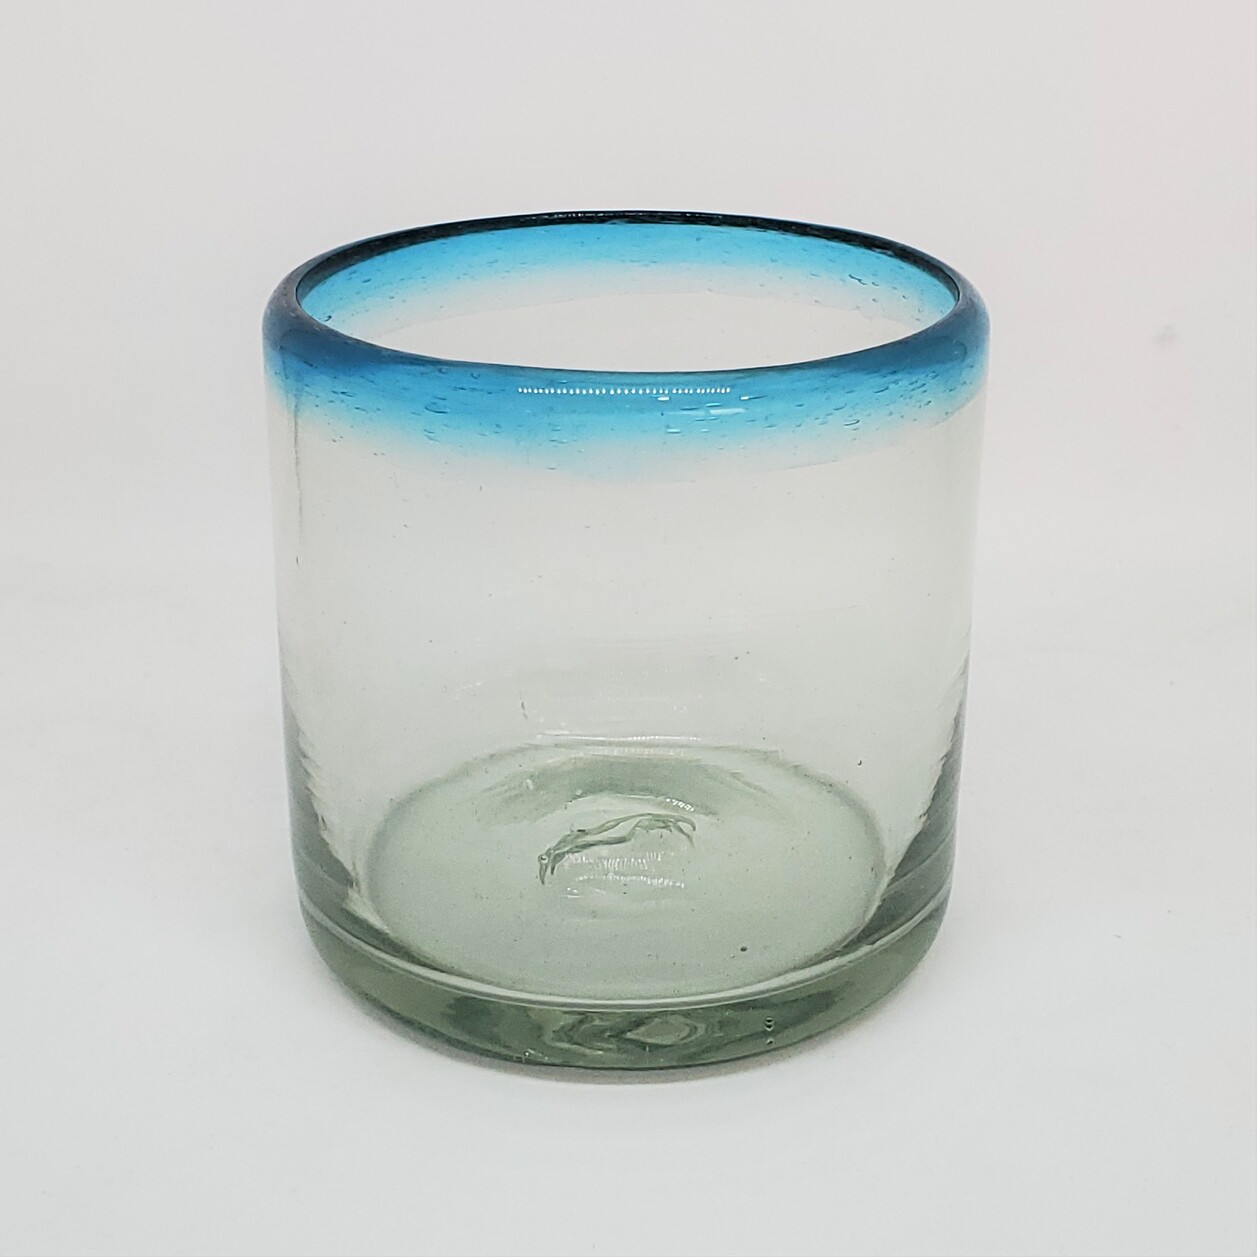 Sale Items / Aqua Blue Rim 8 oz DOF Rocks Glasses (set of 6) / These glasses are just the right size to enjoy fresh squeezed fruit juice in the moning.